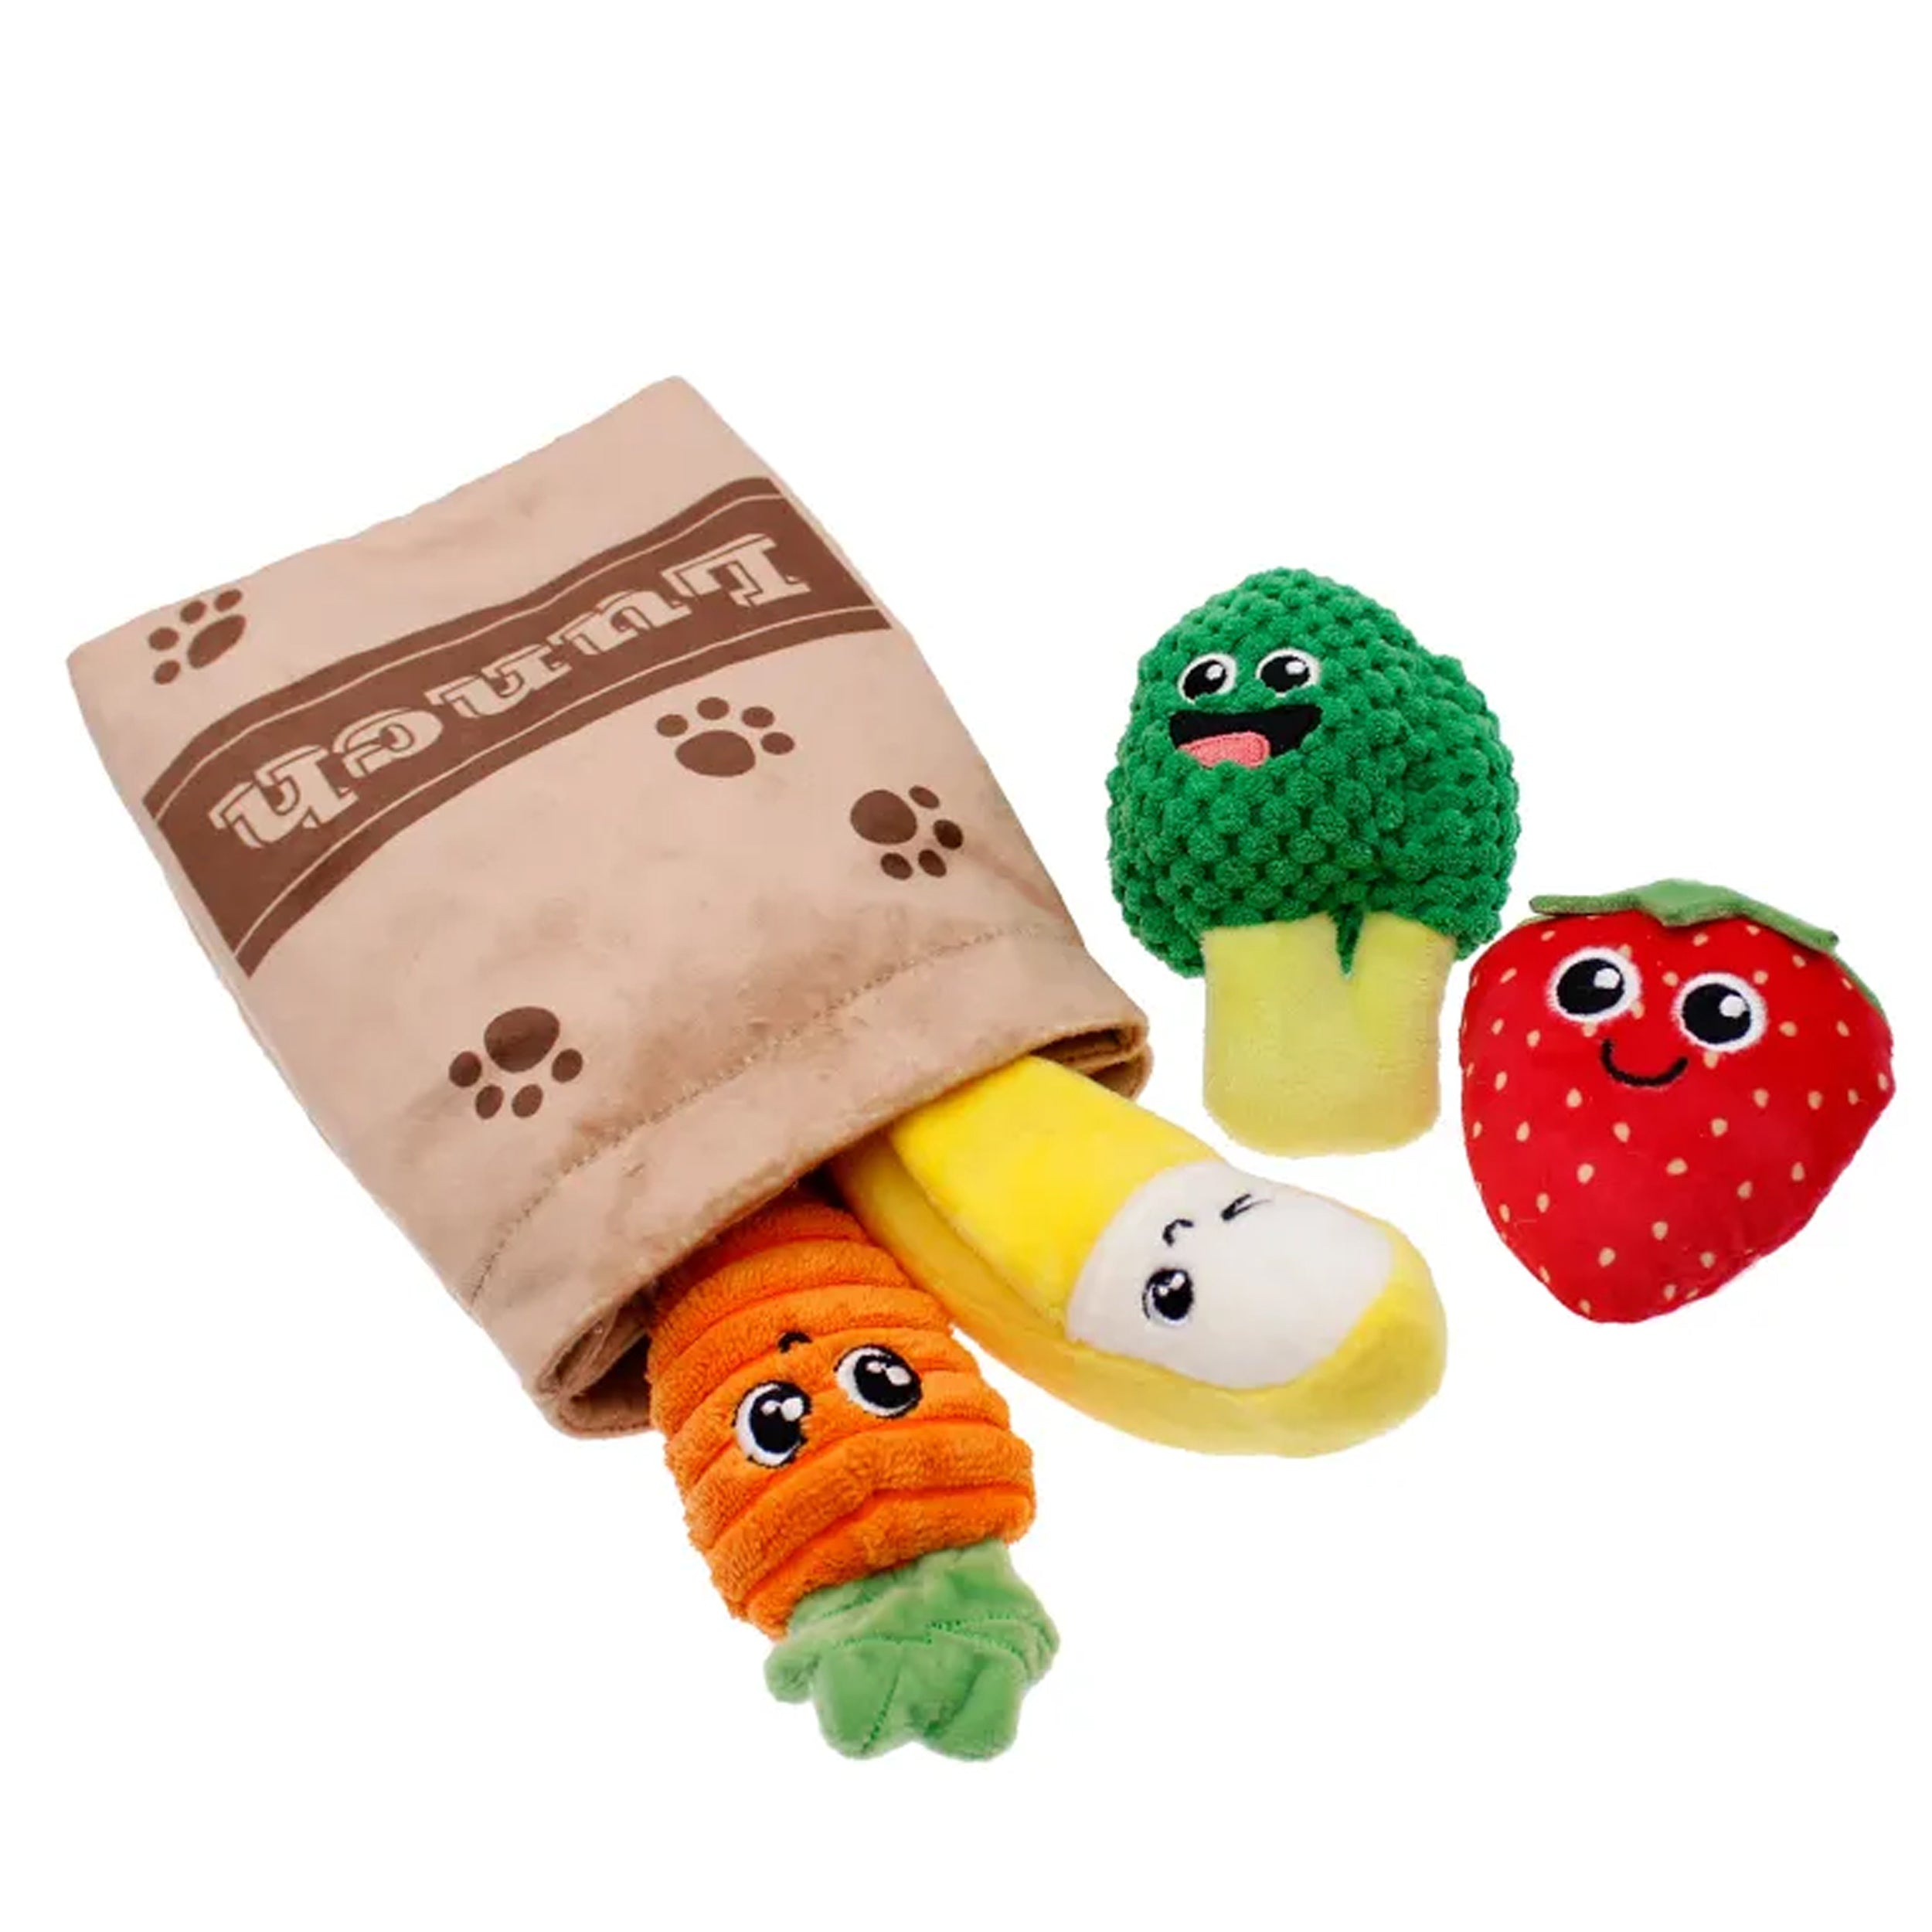 Multiple Choice Lunch Food Chew Squeaky Plush Dog Toy